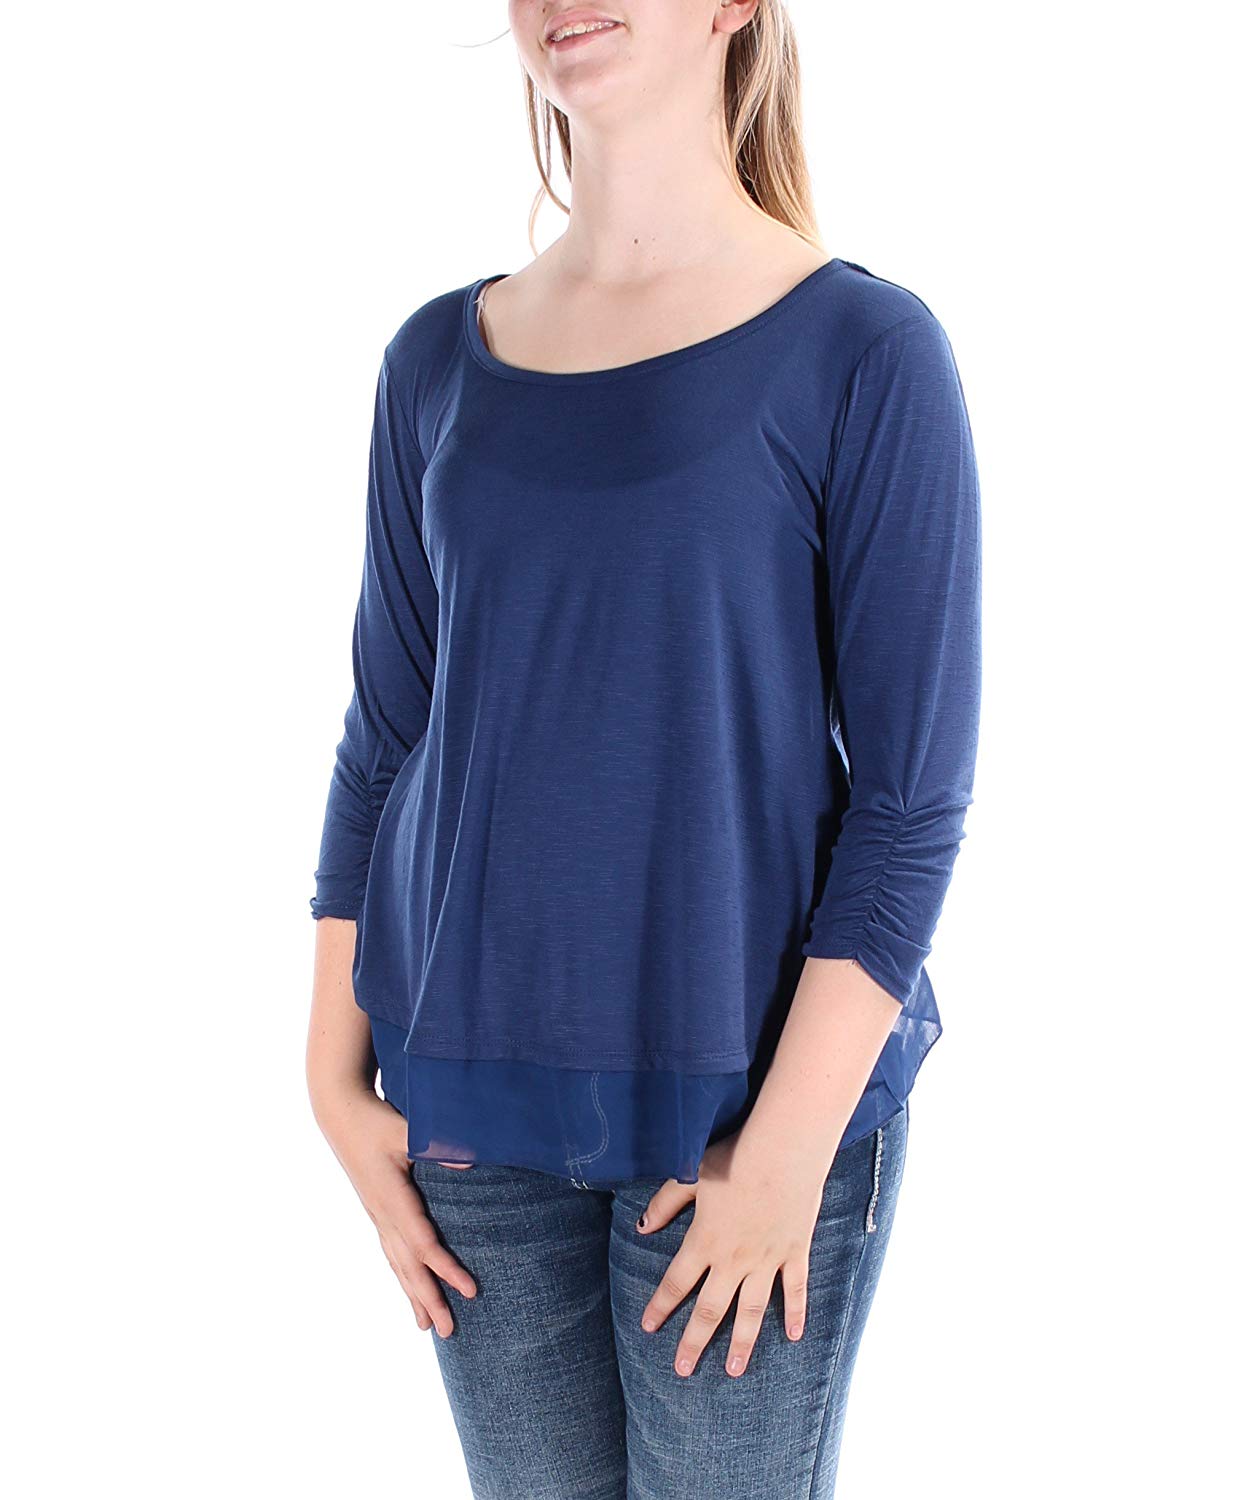 Style & Co. Mountain Womens Medium Scoop Neck Knit Top Blue M